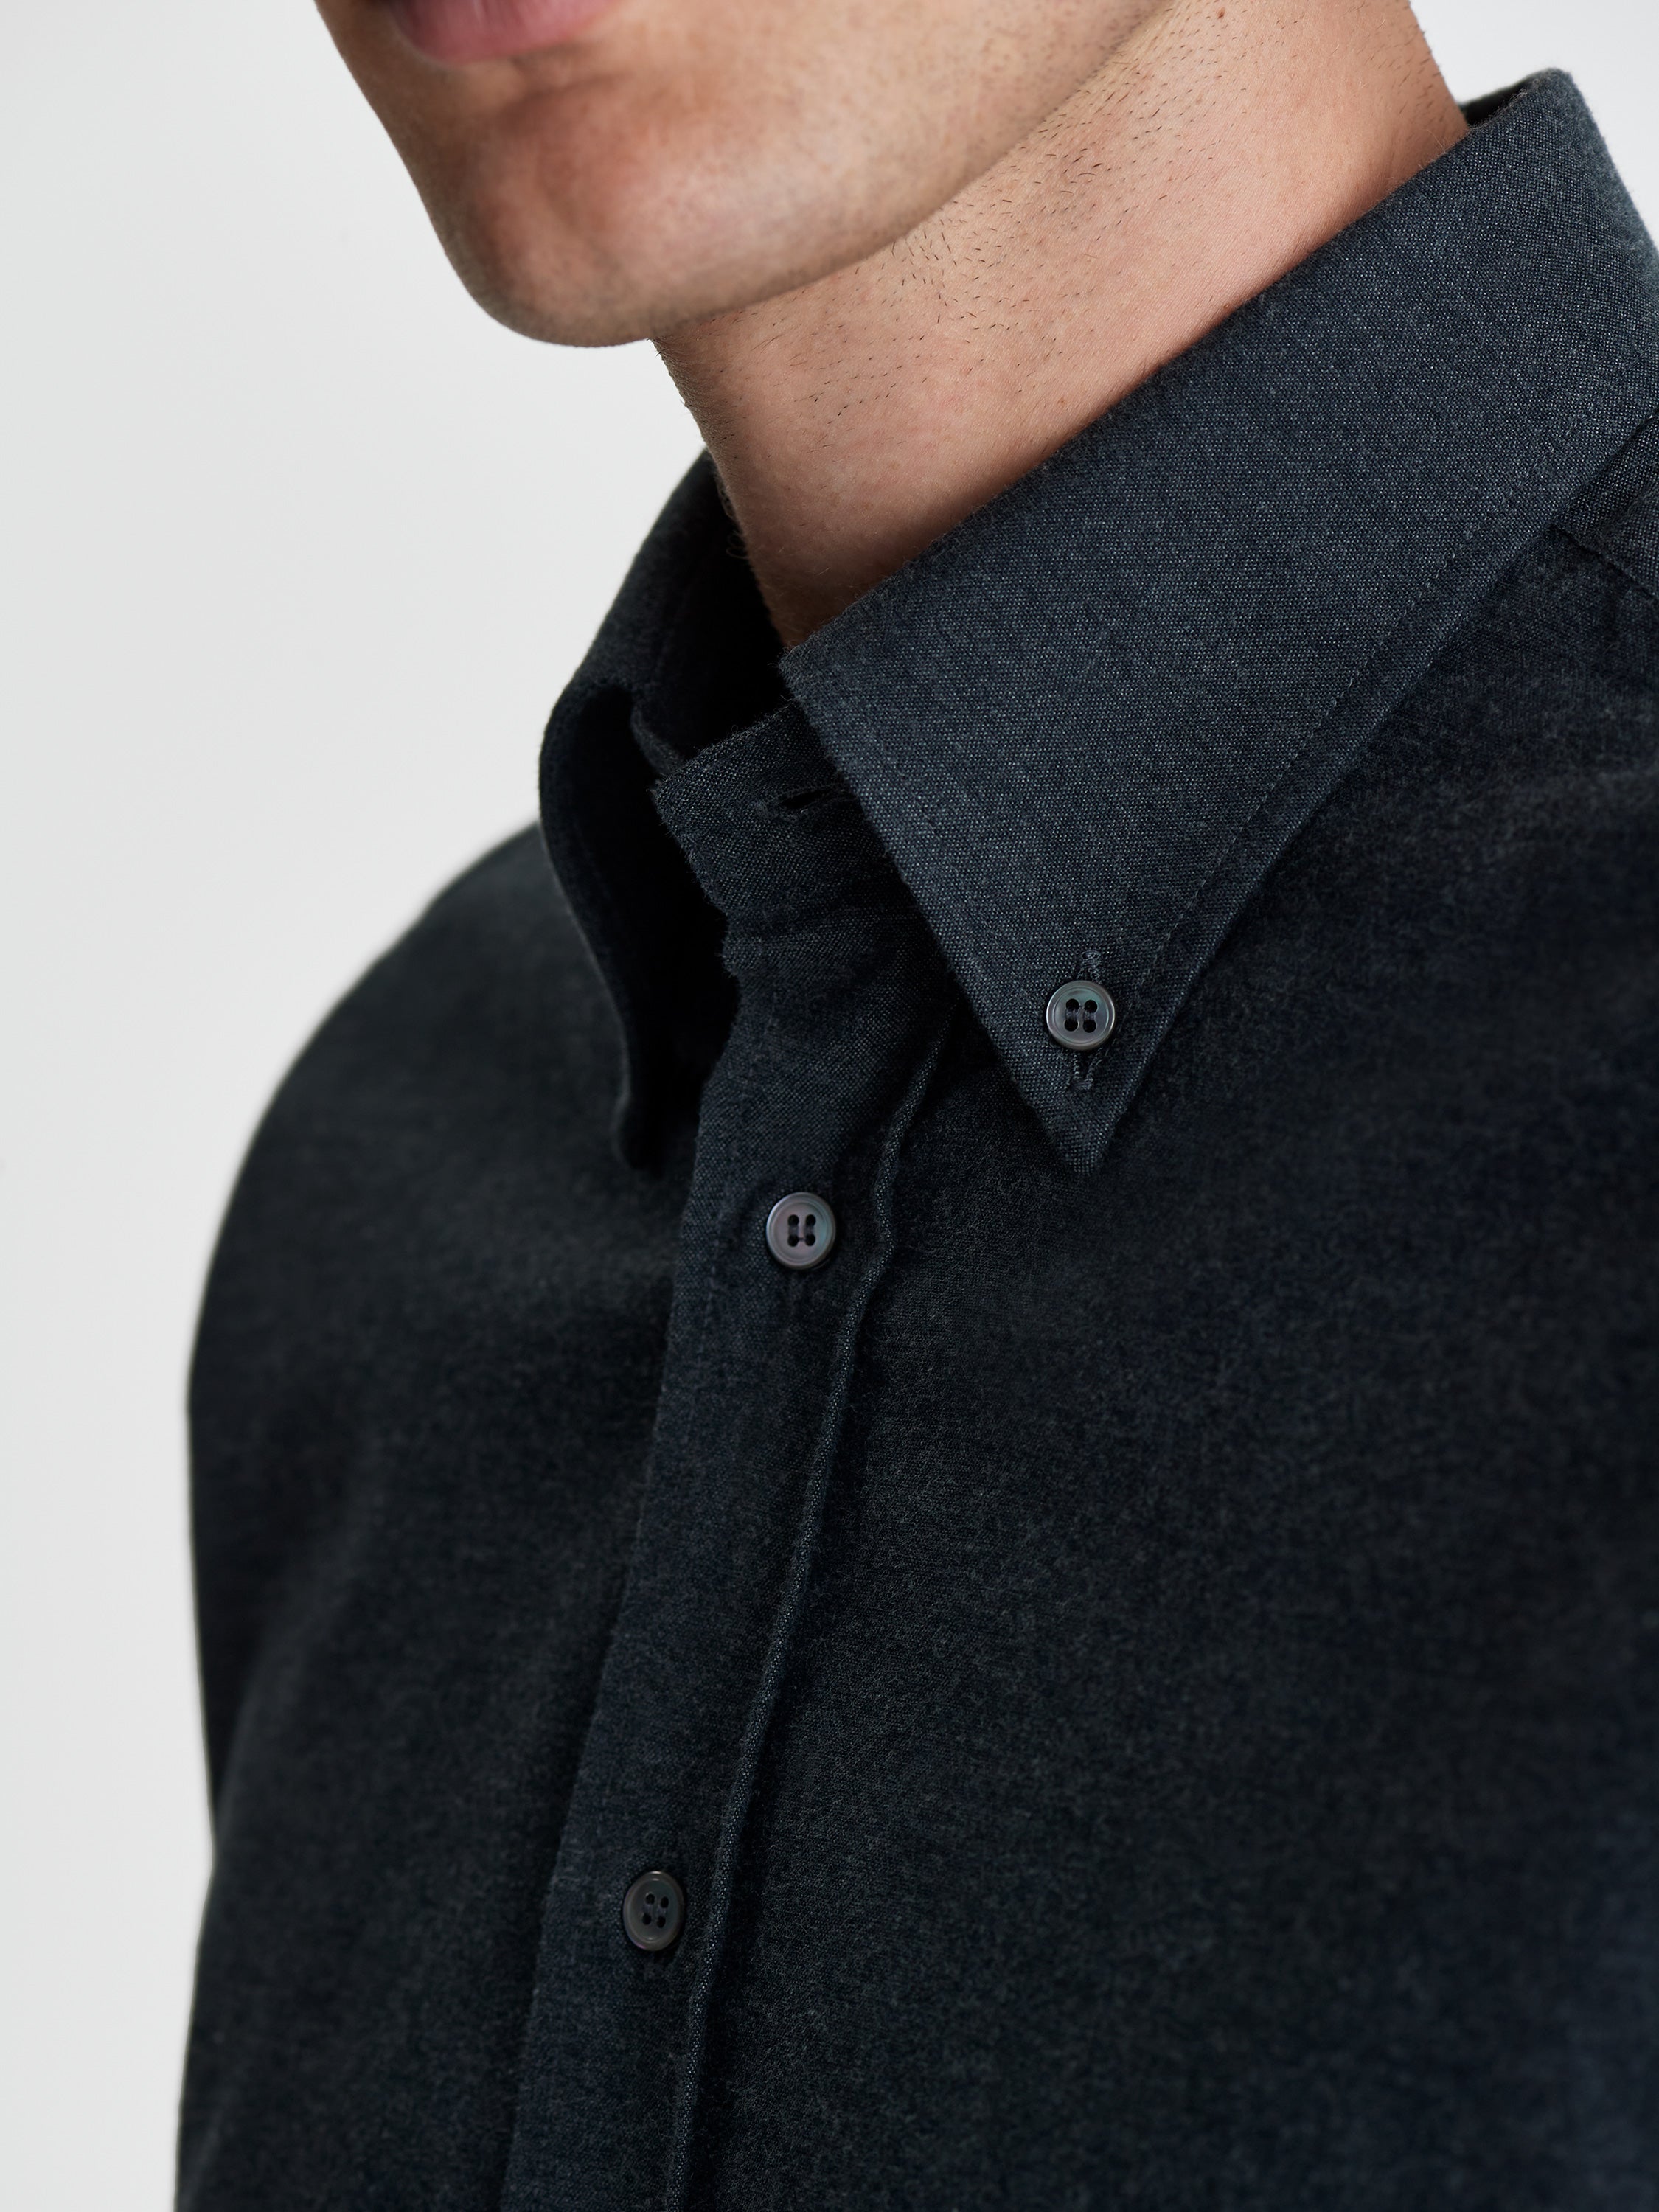 Flannel Button Down Collar Shirt Charcoal Detail Model Image